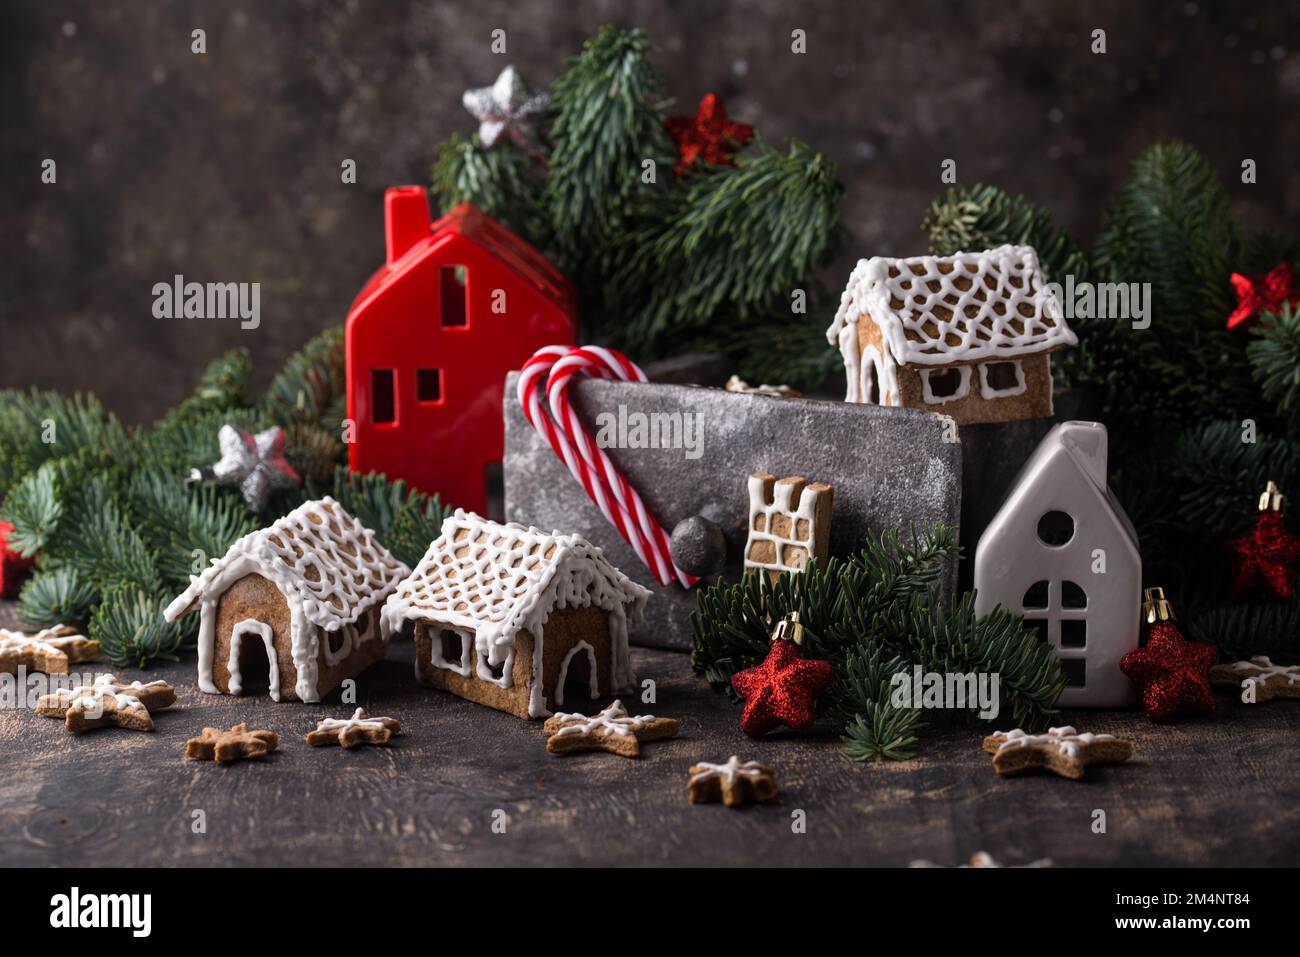 Christmas gingerbread house. Festive cookies. Stock Photo